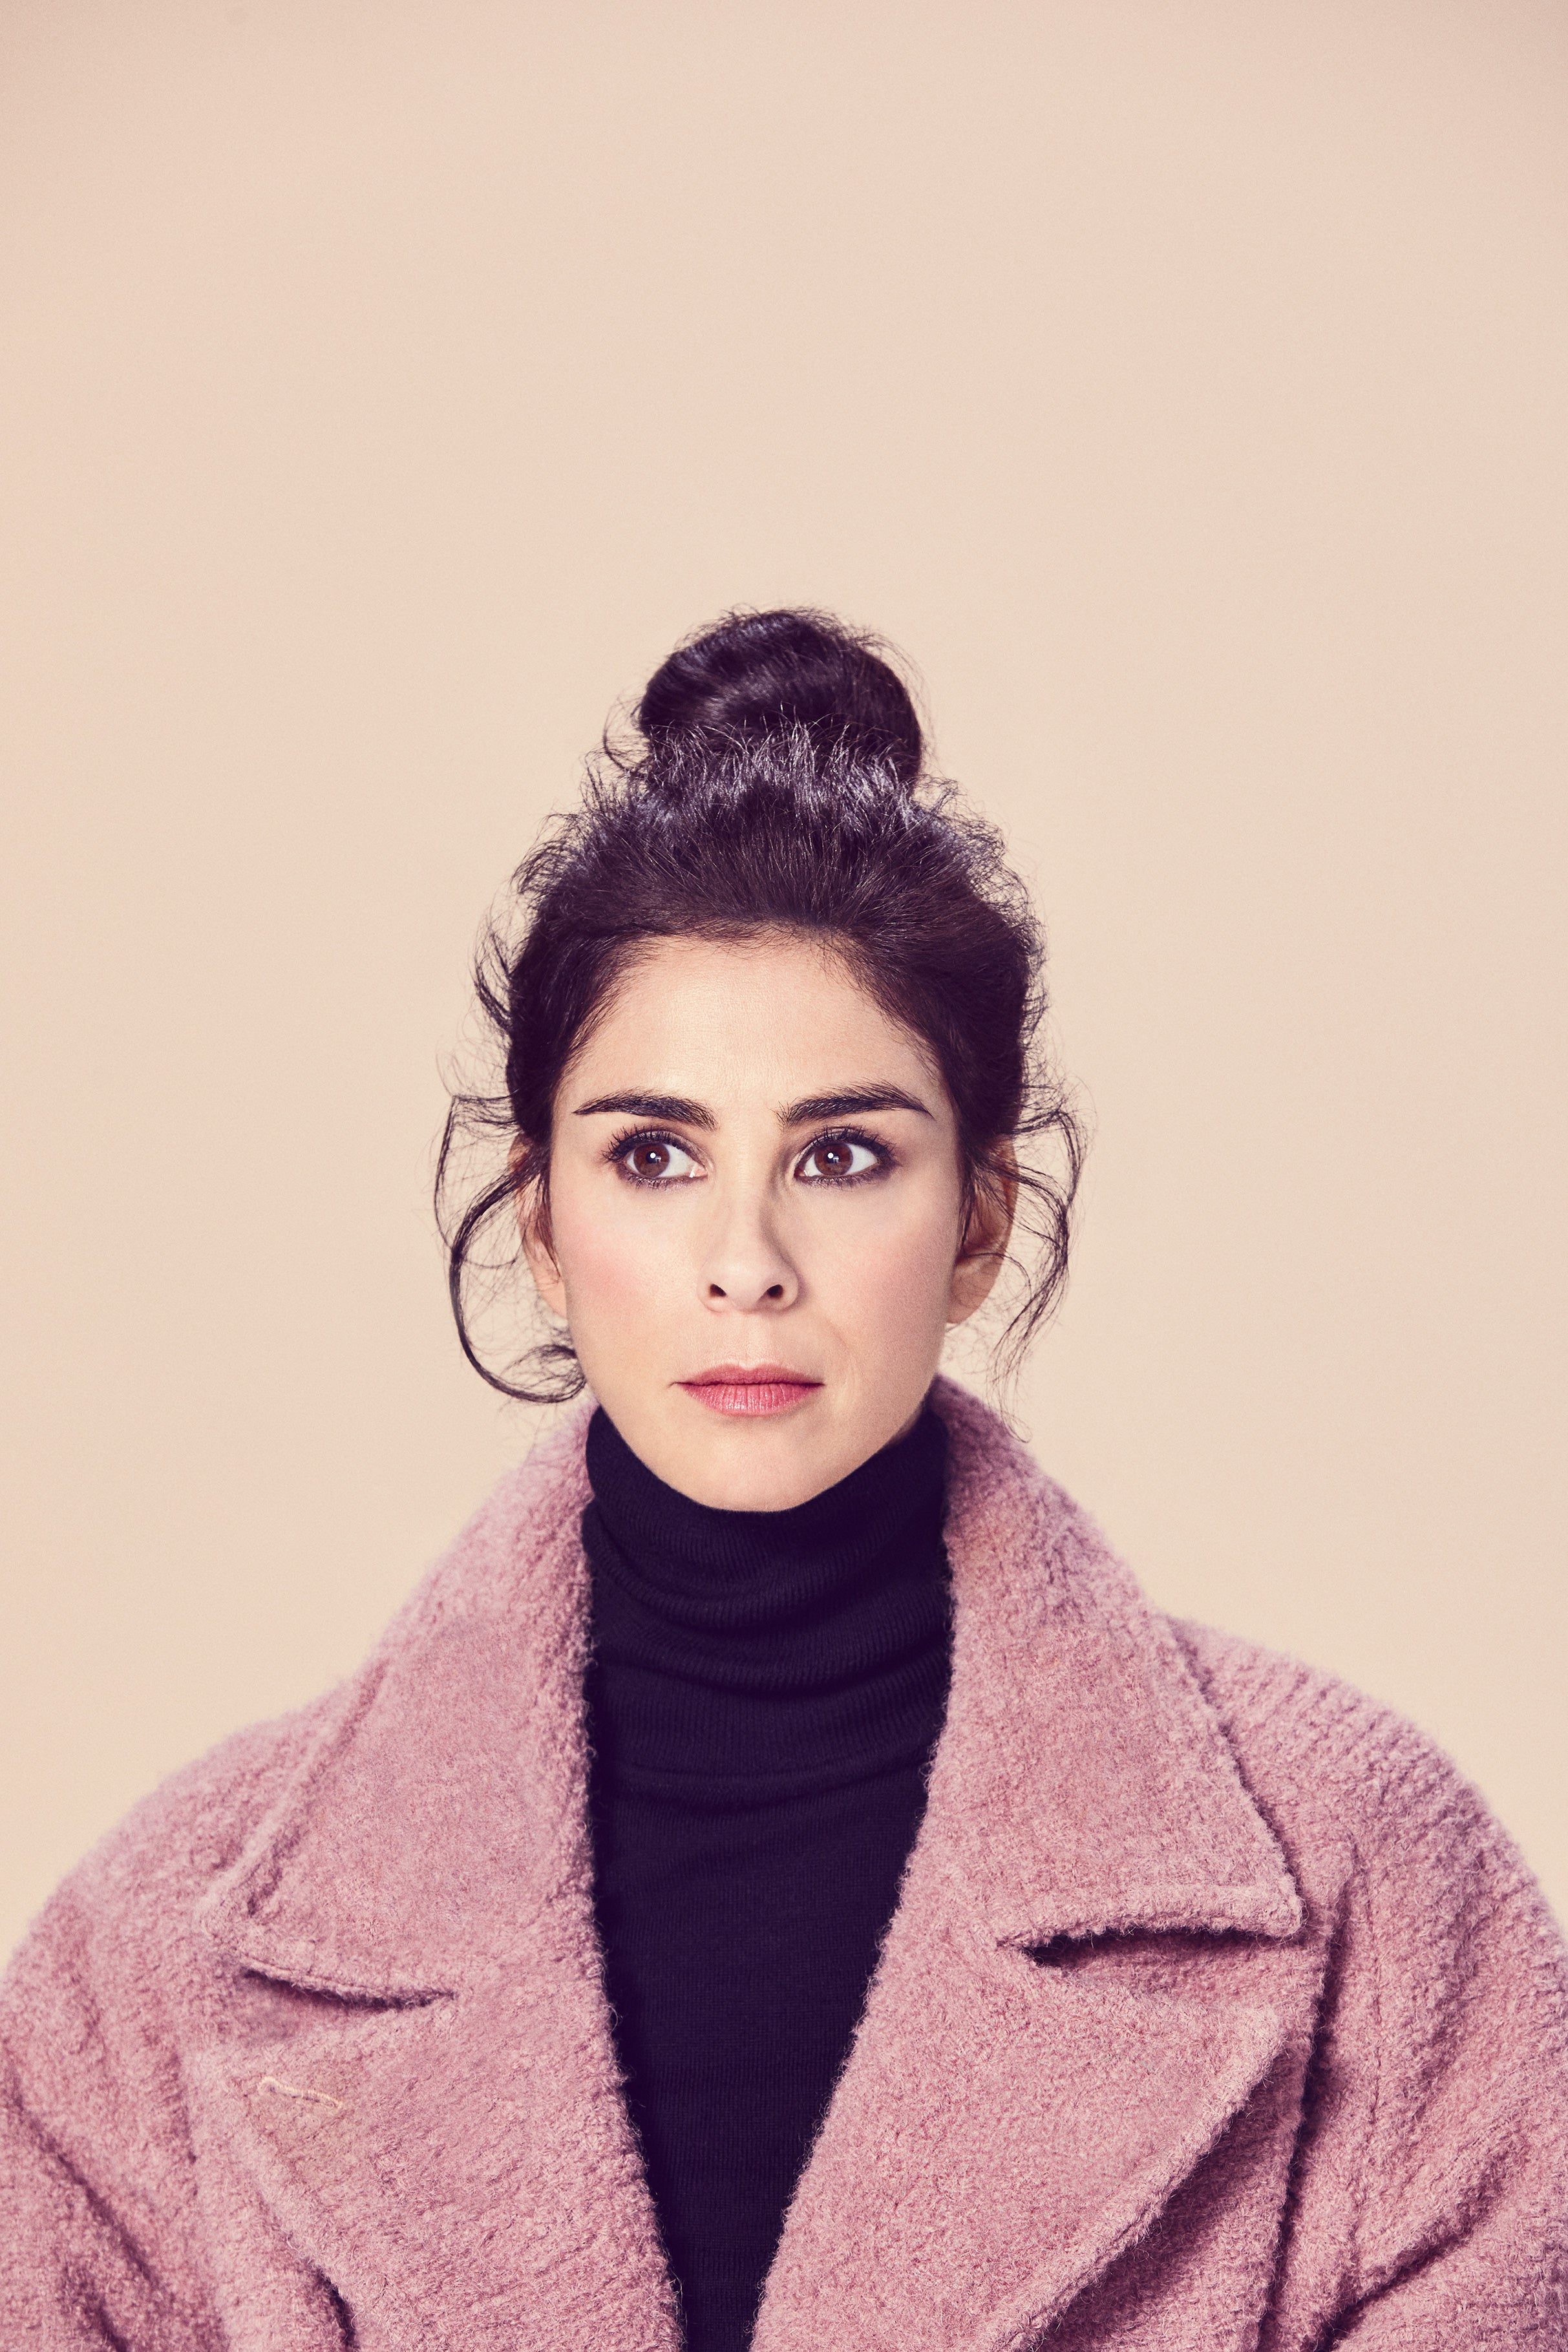 Sarah Silverman: Grow Some Lips free presale password for early tickets in Atlantic City